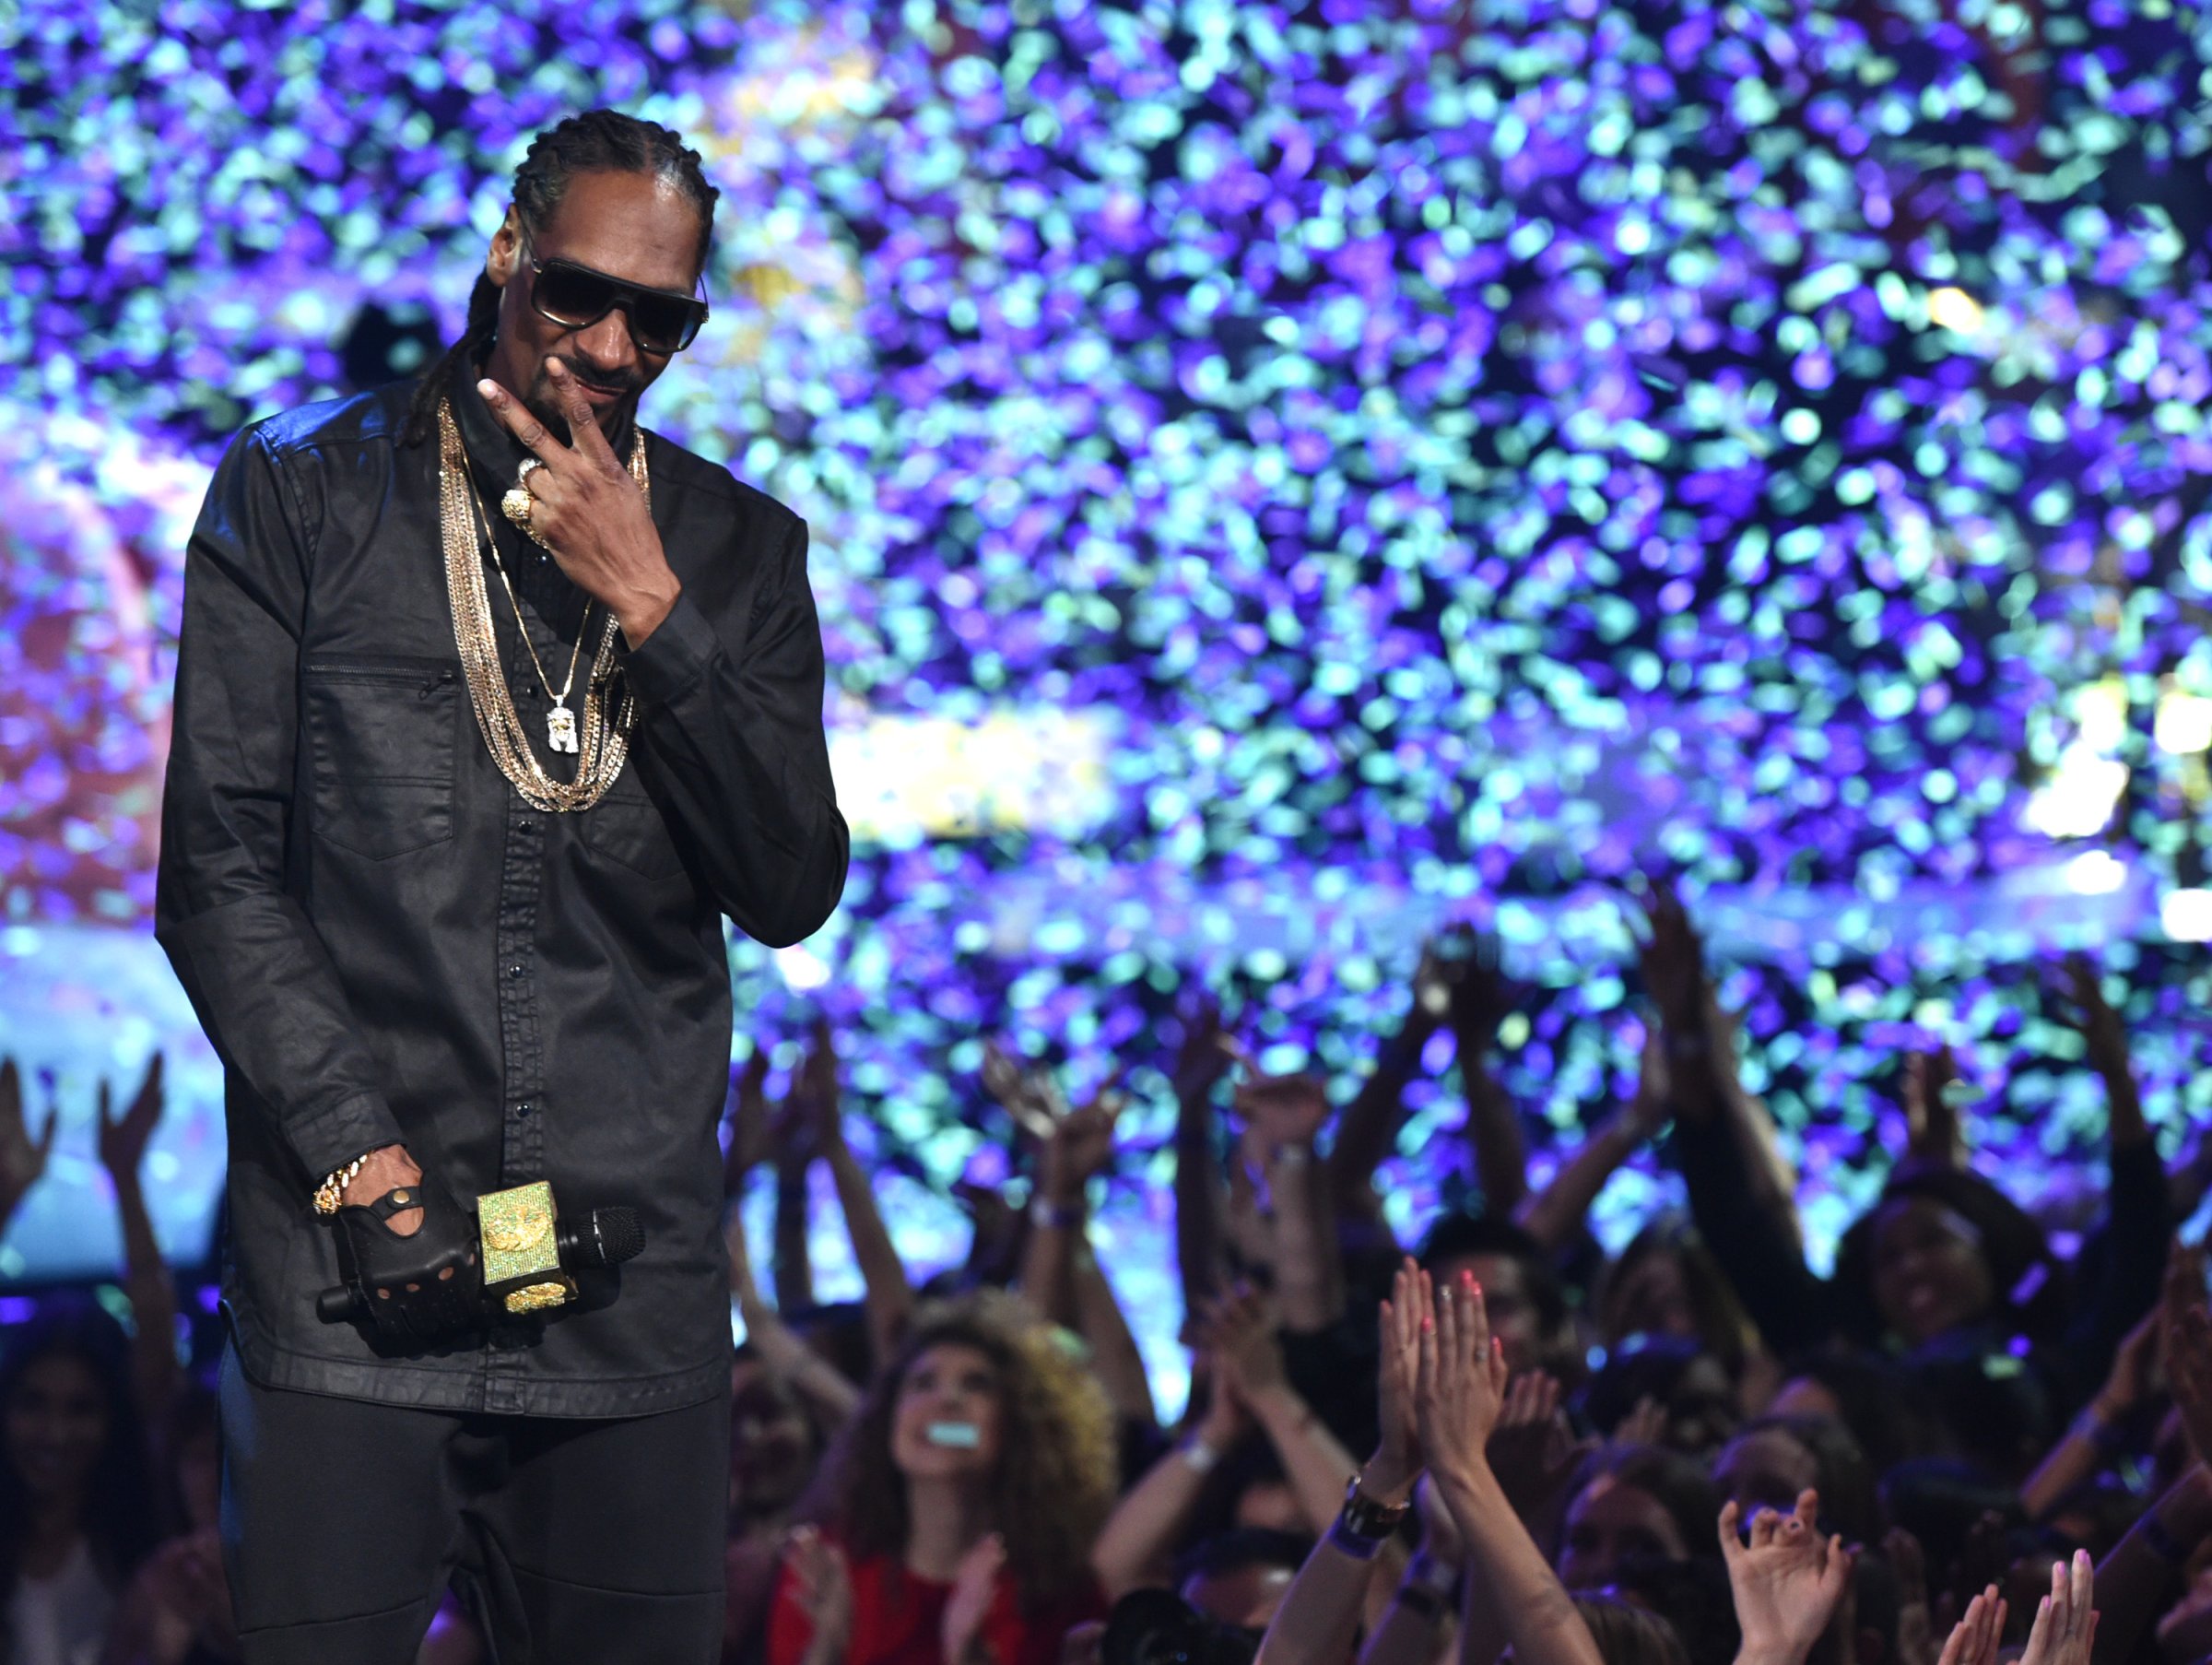 Snoop Dogg performs on stage at the iHeartRadio Music Awards at The Shrine Auditorium on Sunday, March 29, 2015, in Los Angeles.